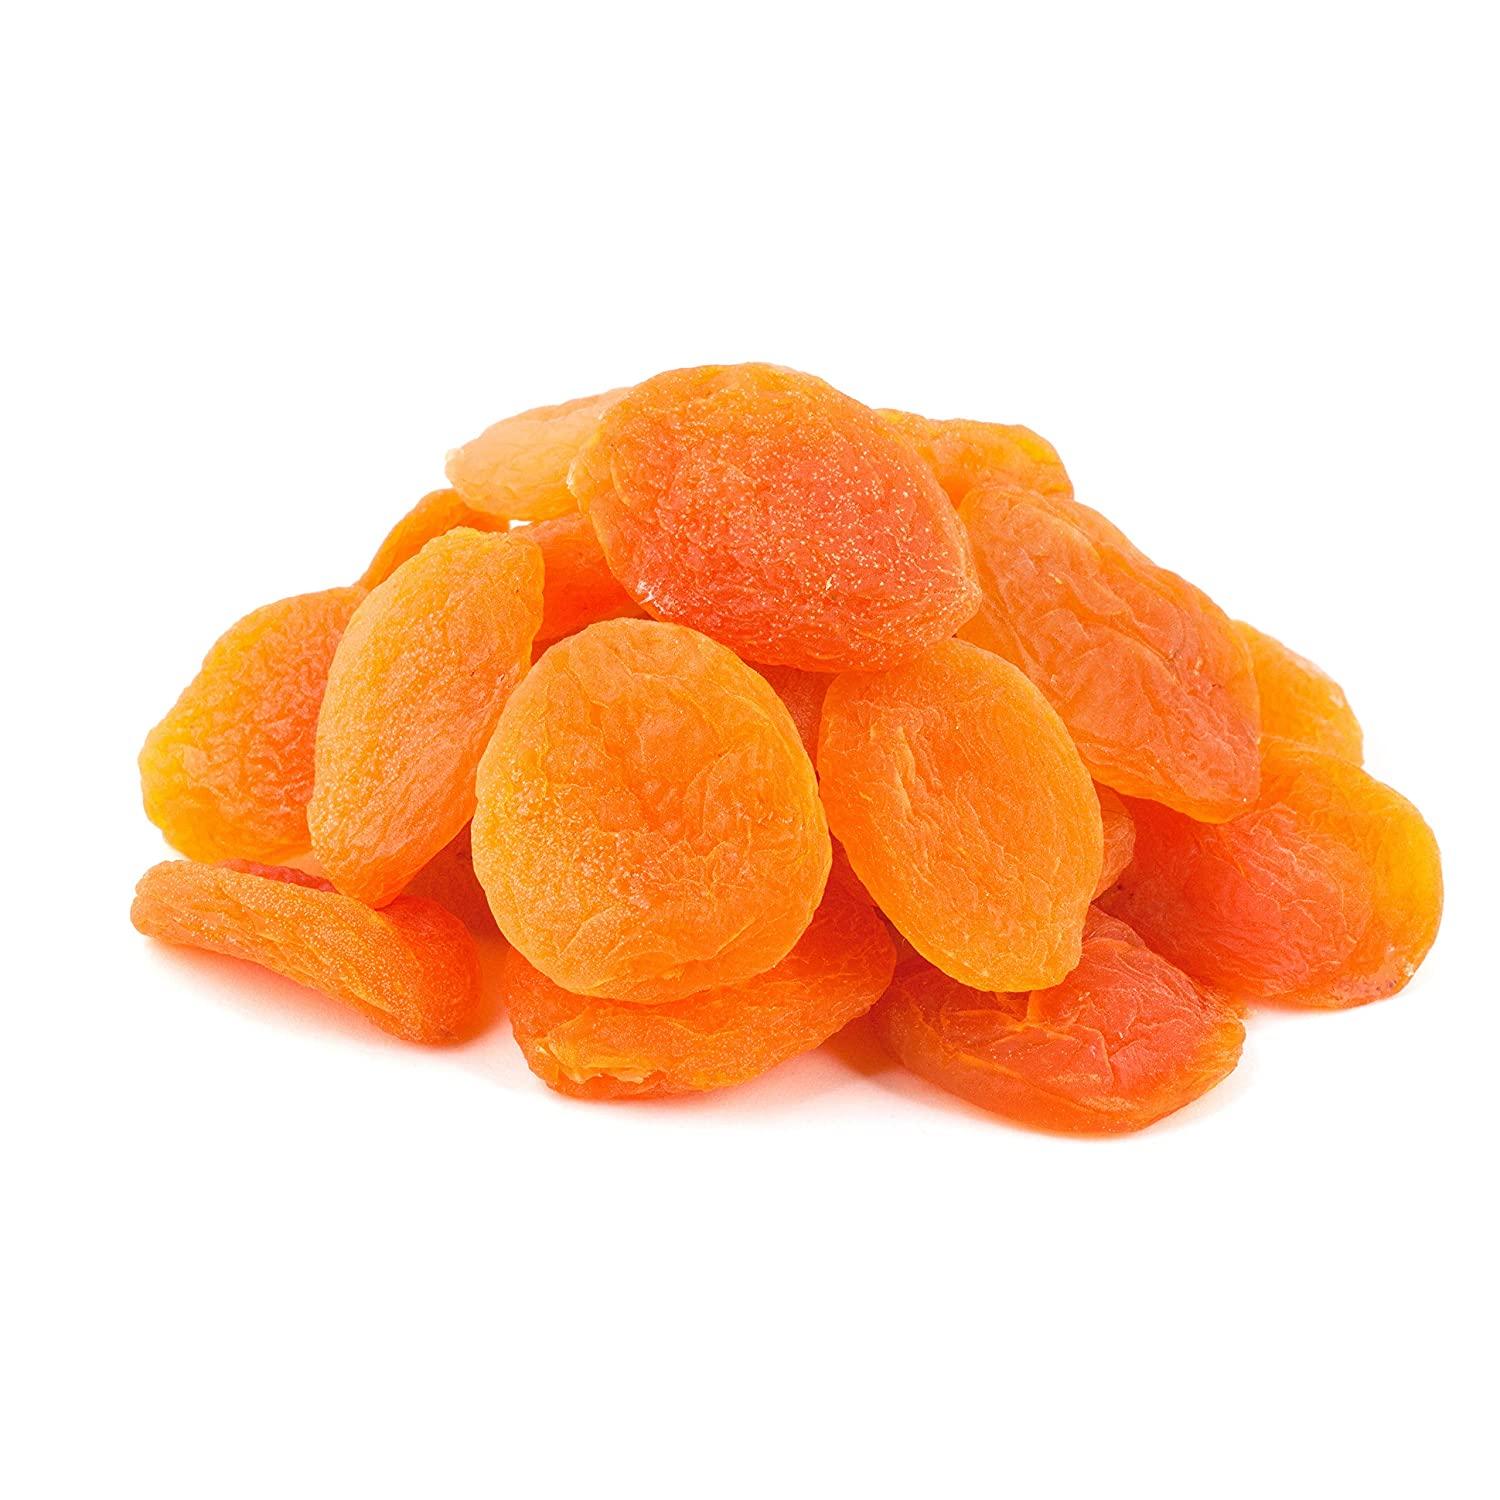 Cerez Pazari Dried Apricots Turkish Extra Jumbo Size 1.5 lbs in Resealable  Bag- Premium Quality, Dehydrated, No Sugar Added, Non-GMO, Gluten Free